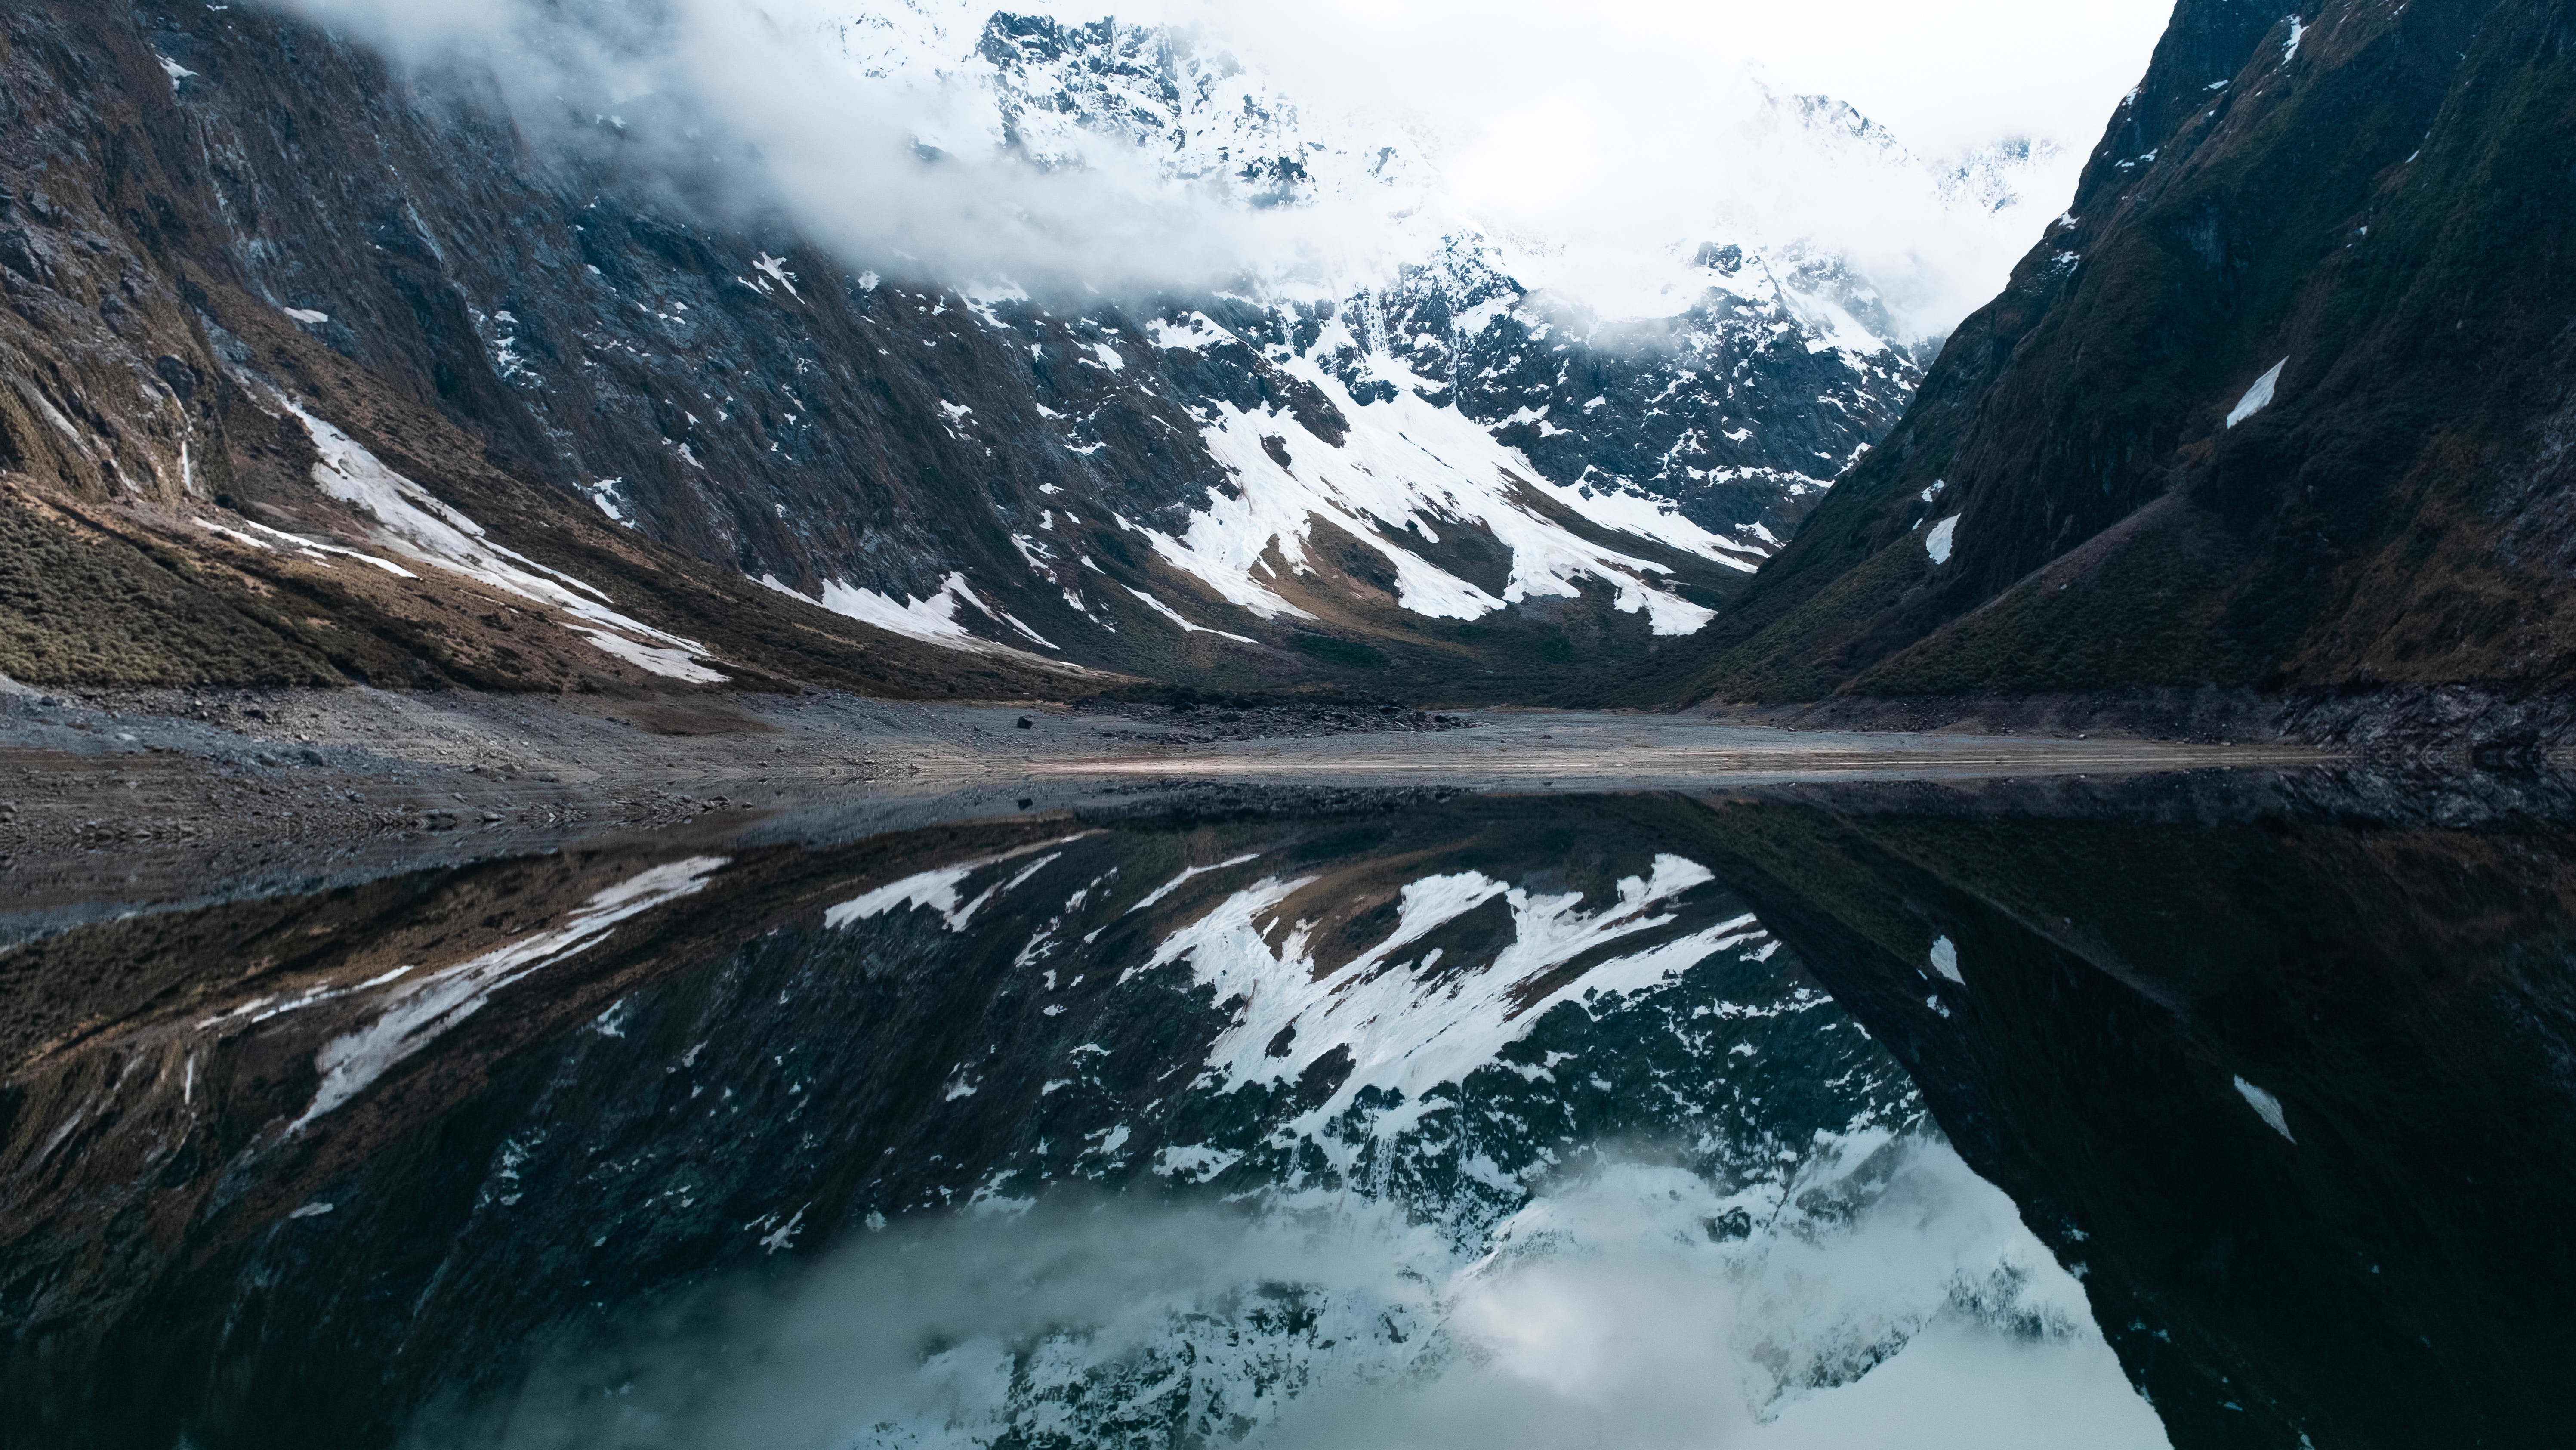 Nature Water Mountains Snow Lake Reflection Mist Symmetry Calm Waters New Zealand Fiordland National 5987x3369